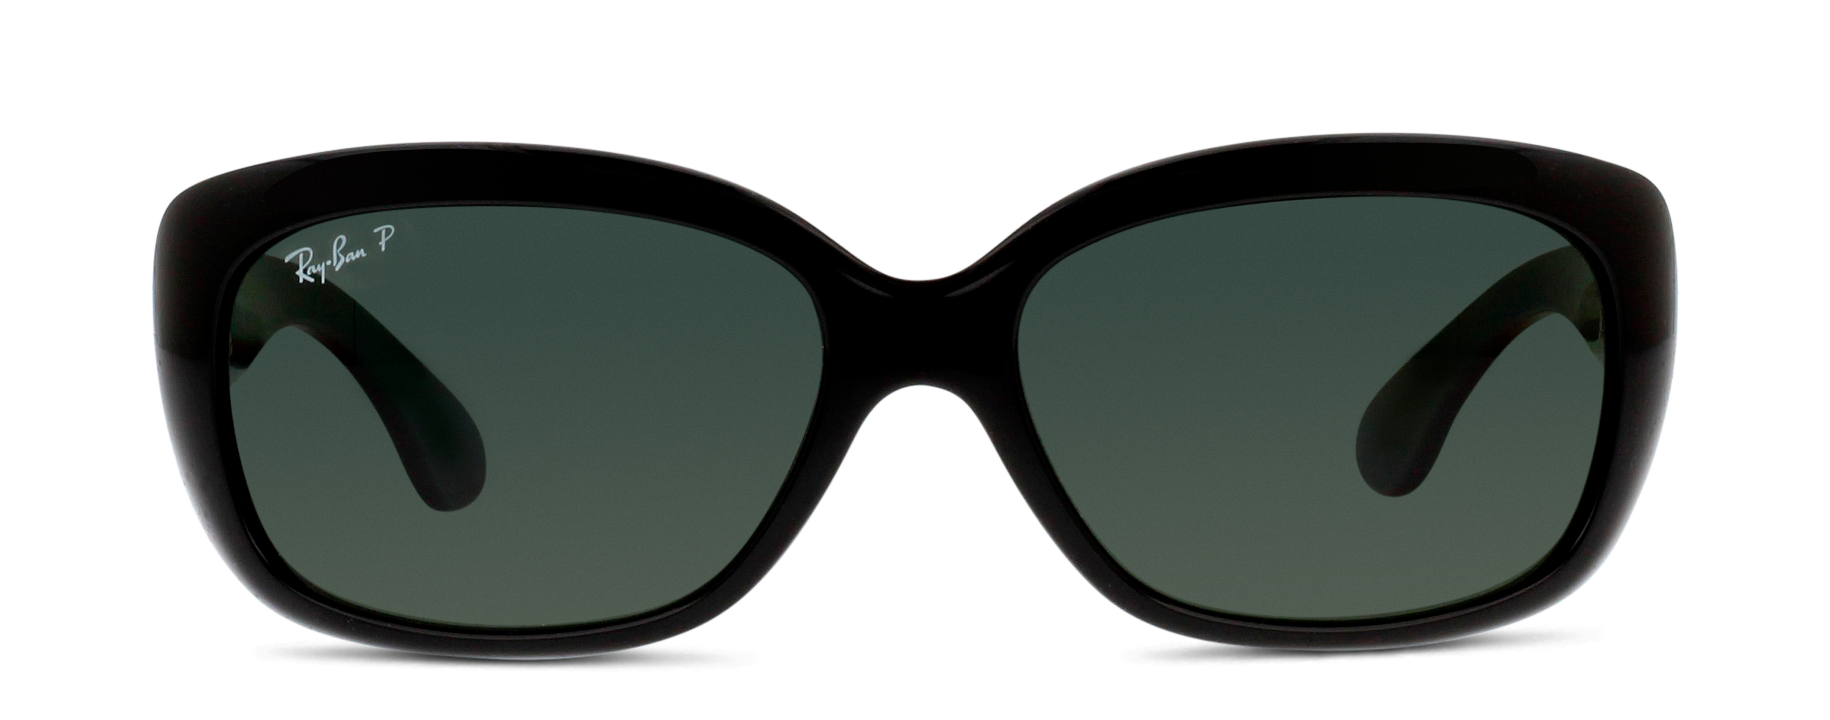 [products.image.front] RAY-BAN RB4101 601/58